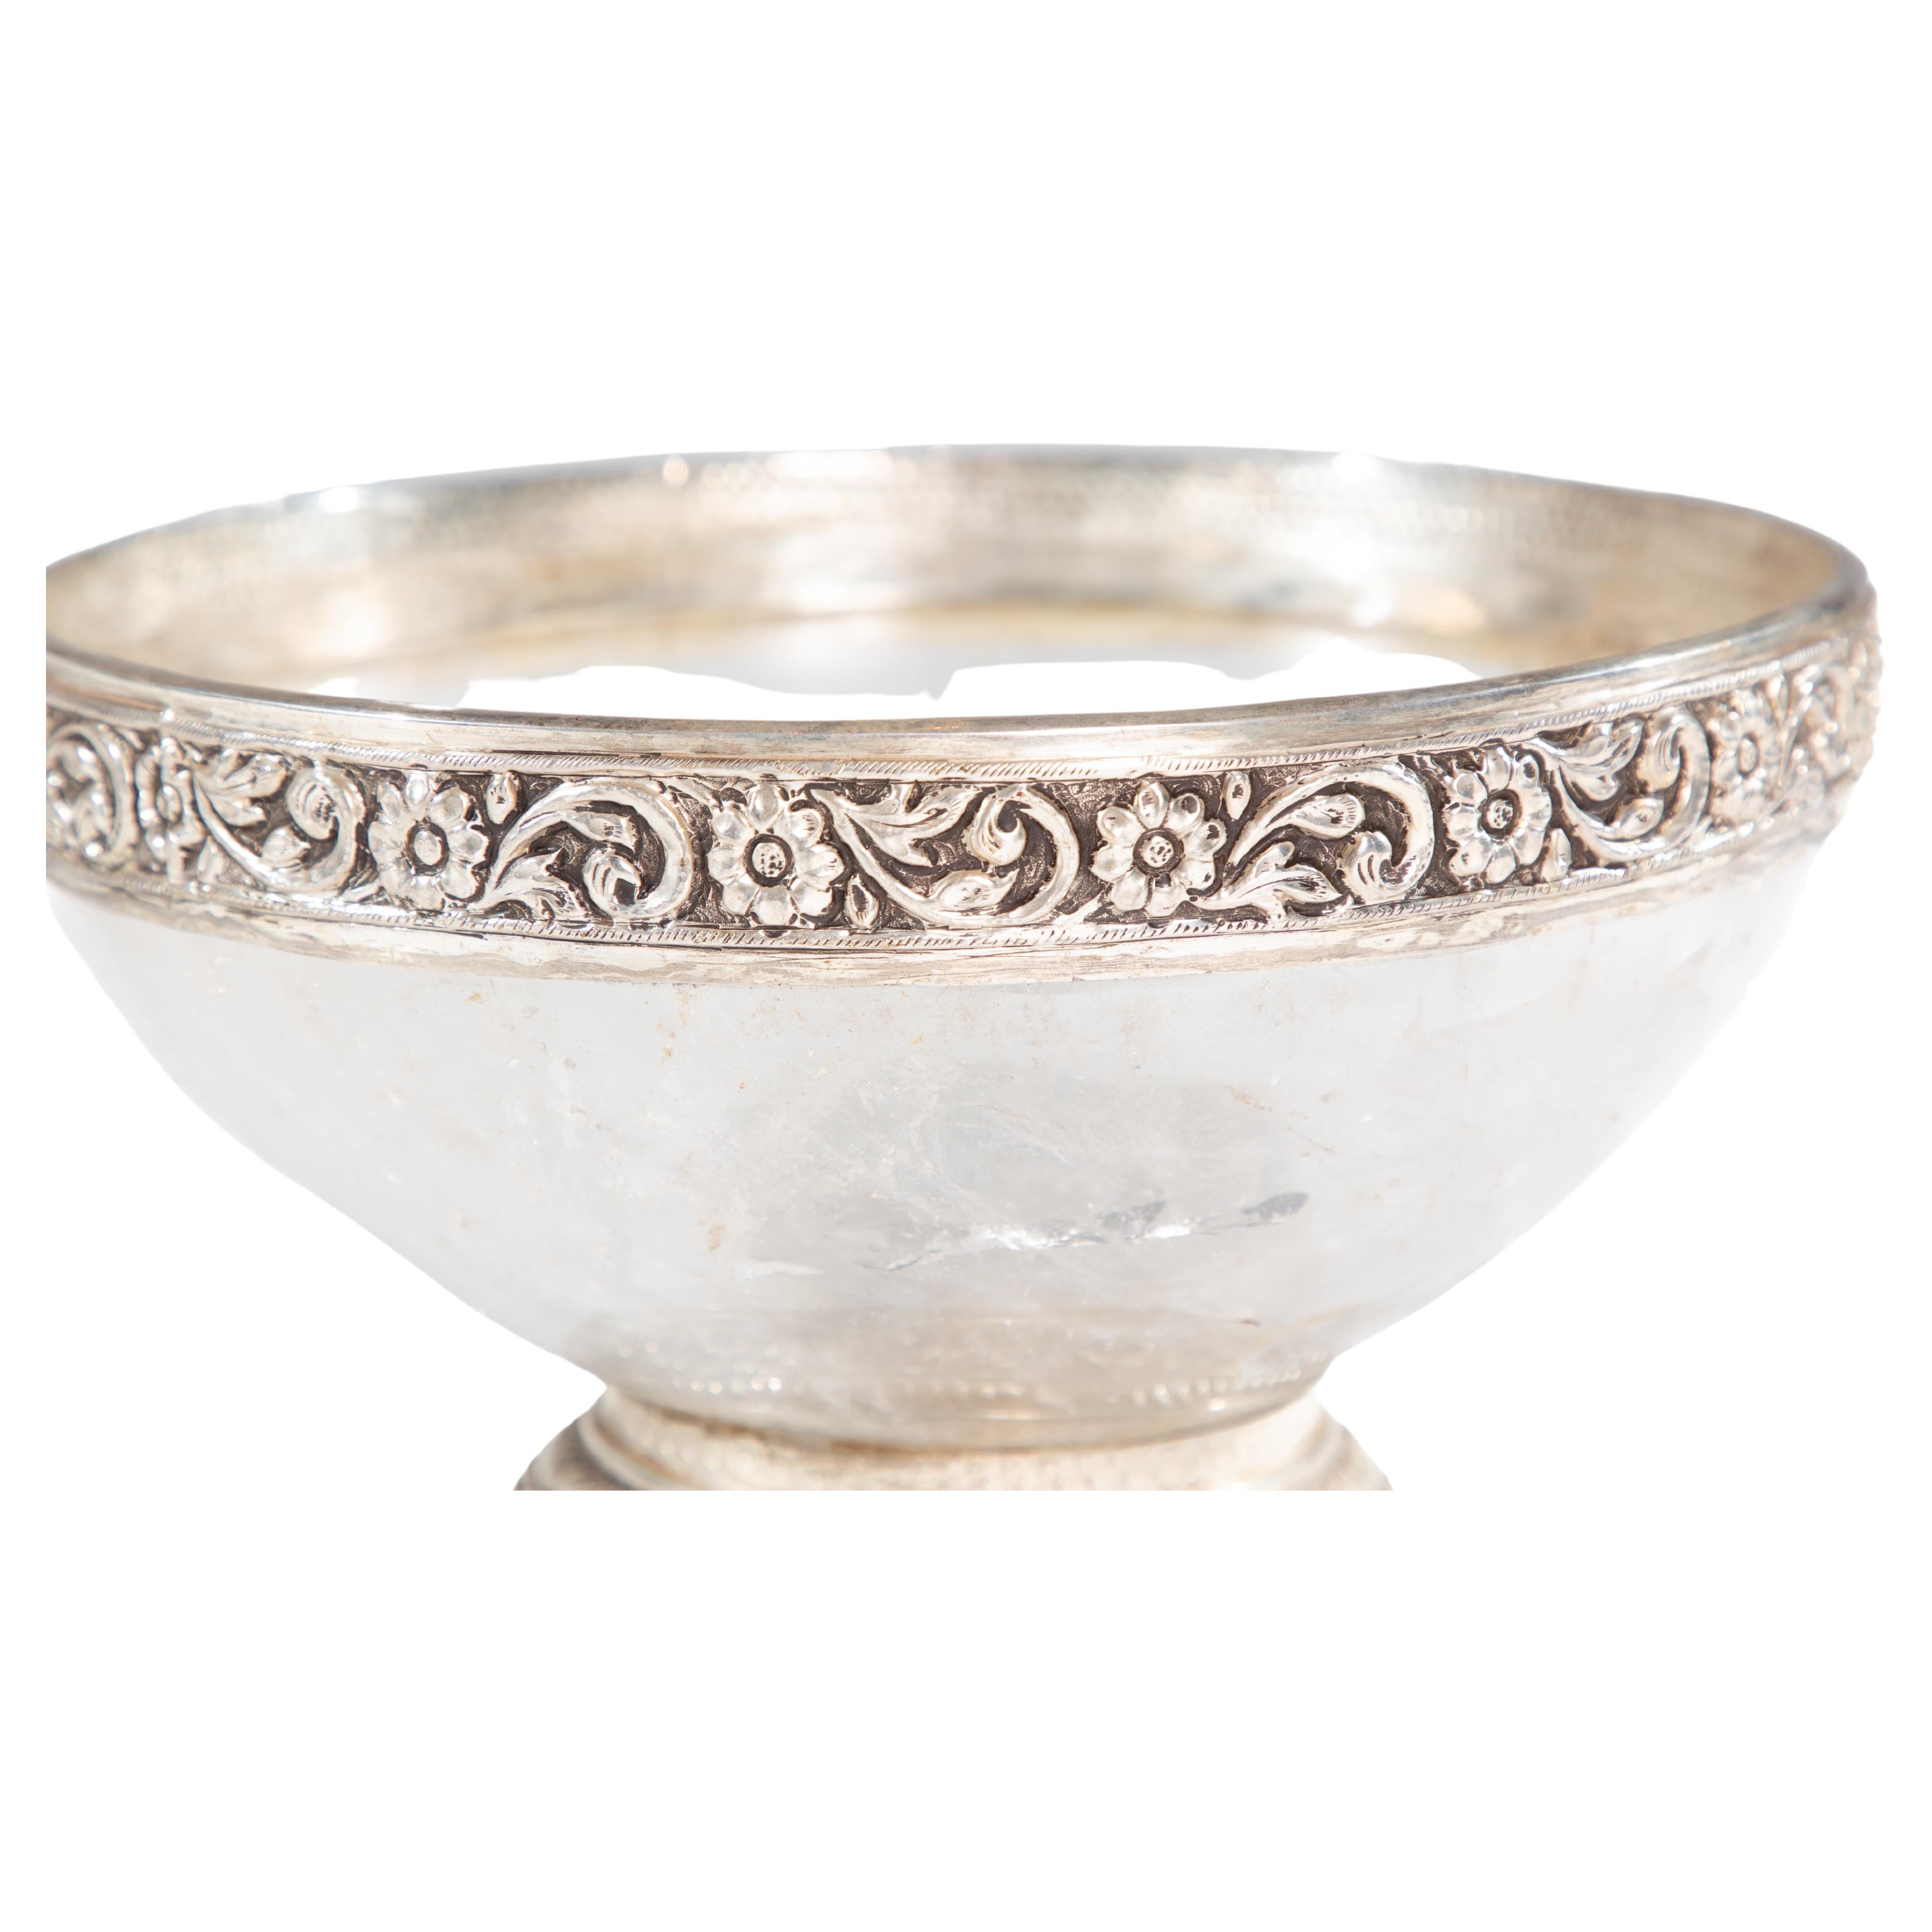 Beautiful rock crystal bowl mounted in silver with a floral / vine pattern.  